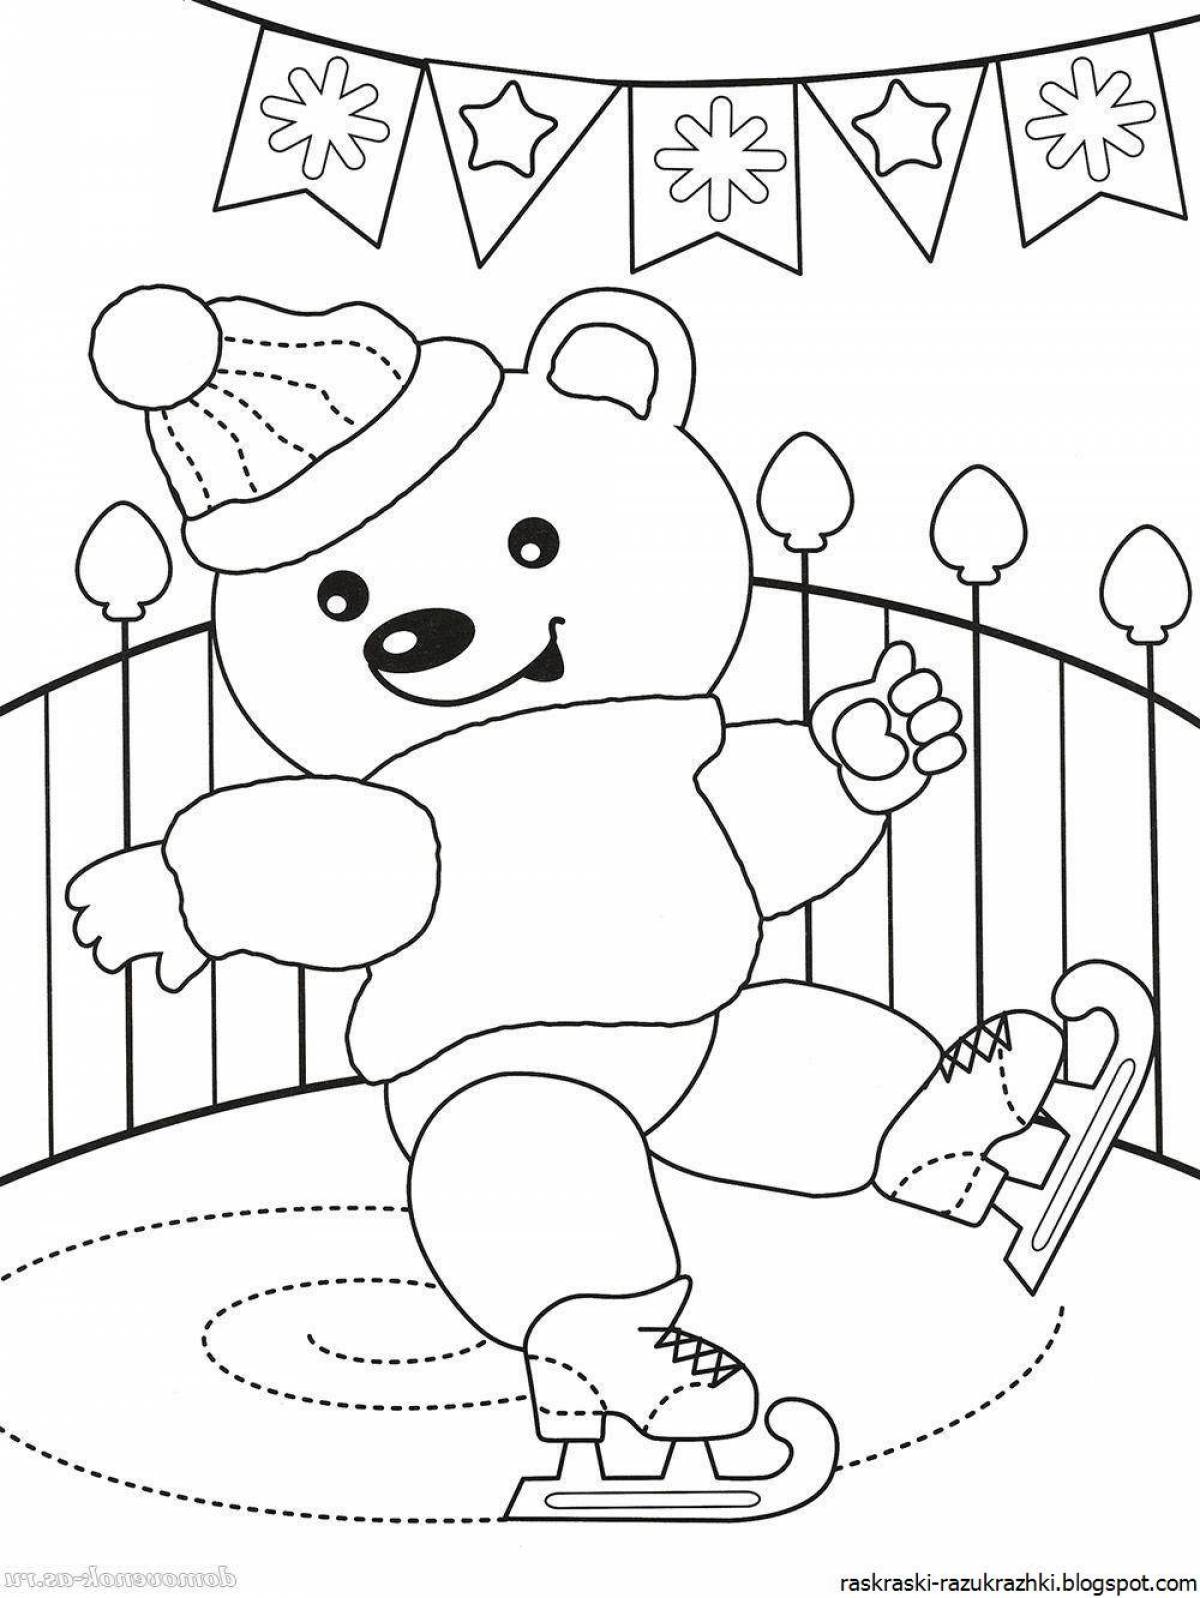 Exquisite winter coloring book for children 5-6 years old